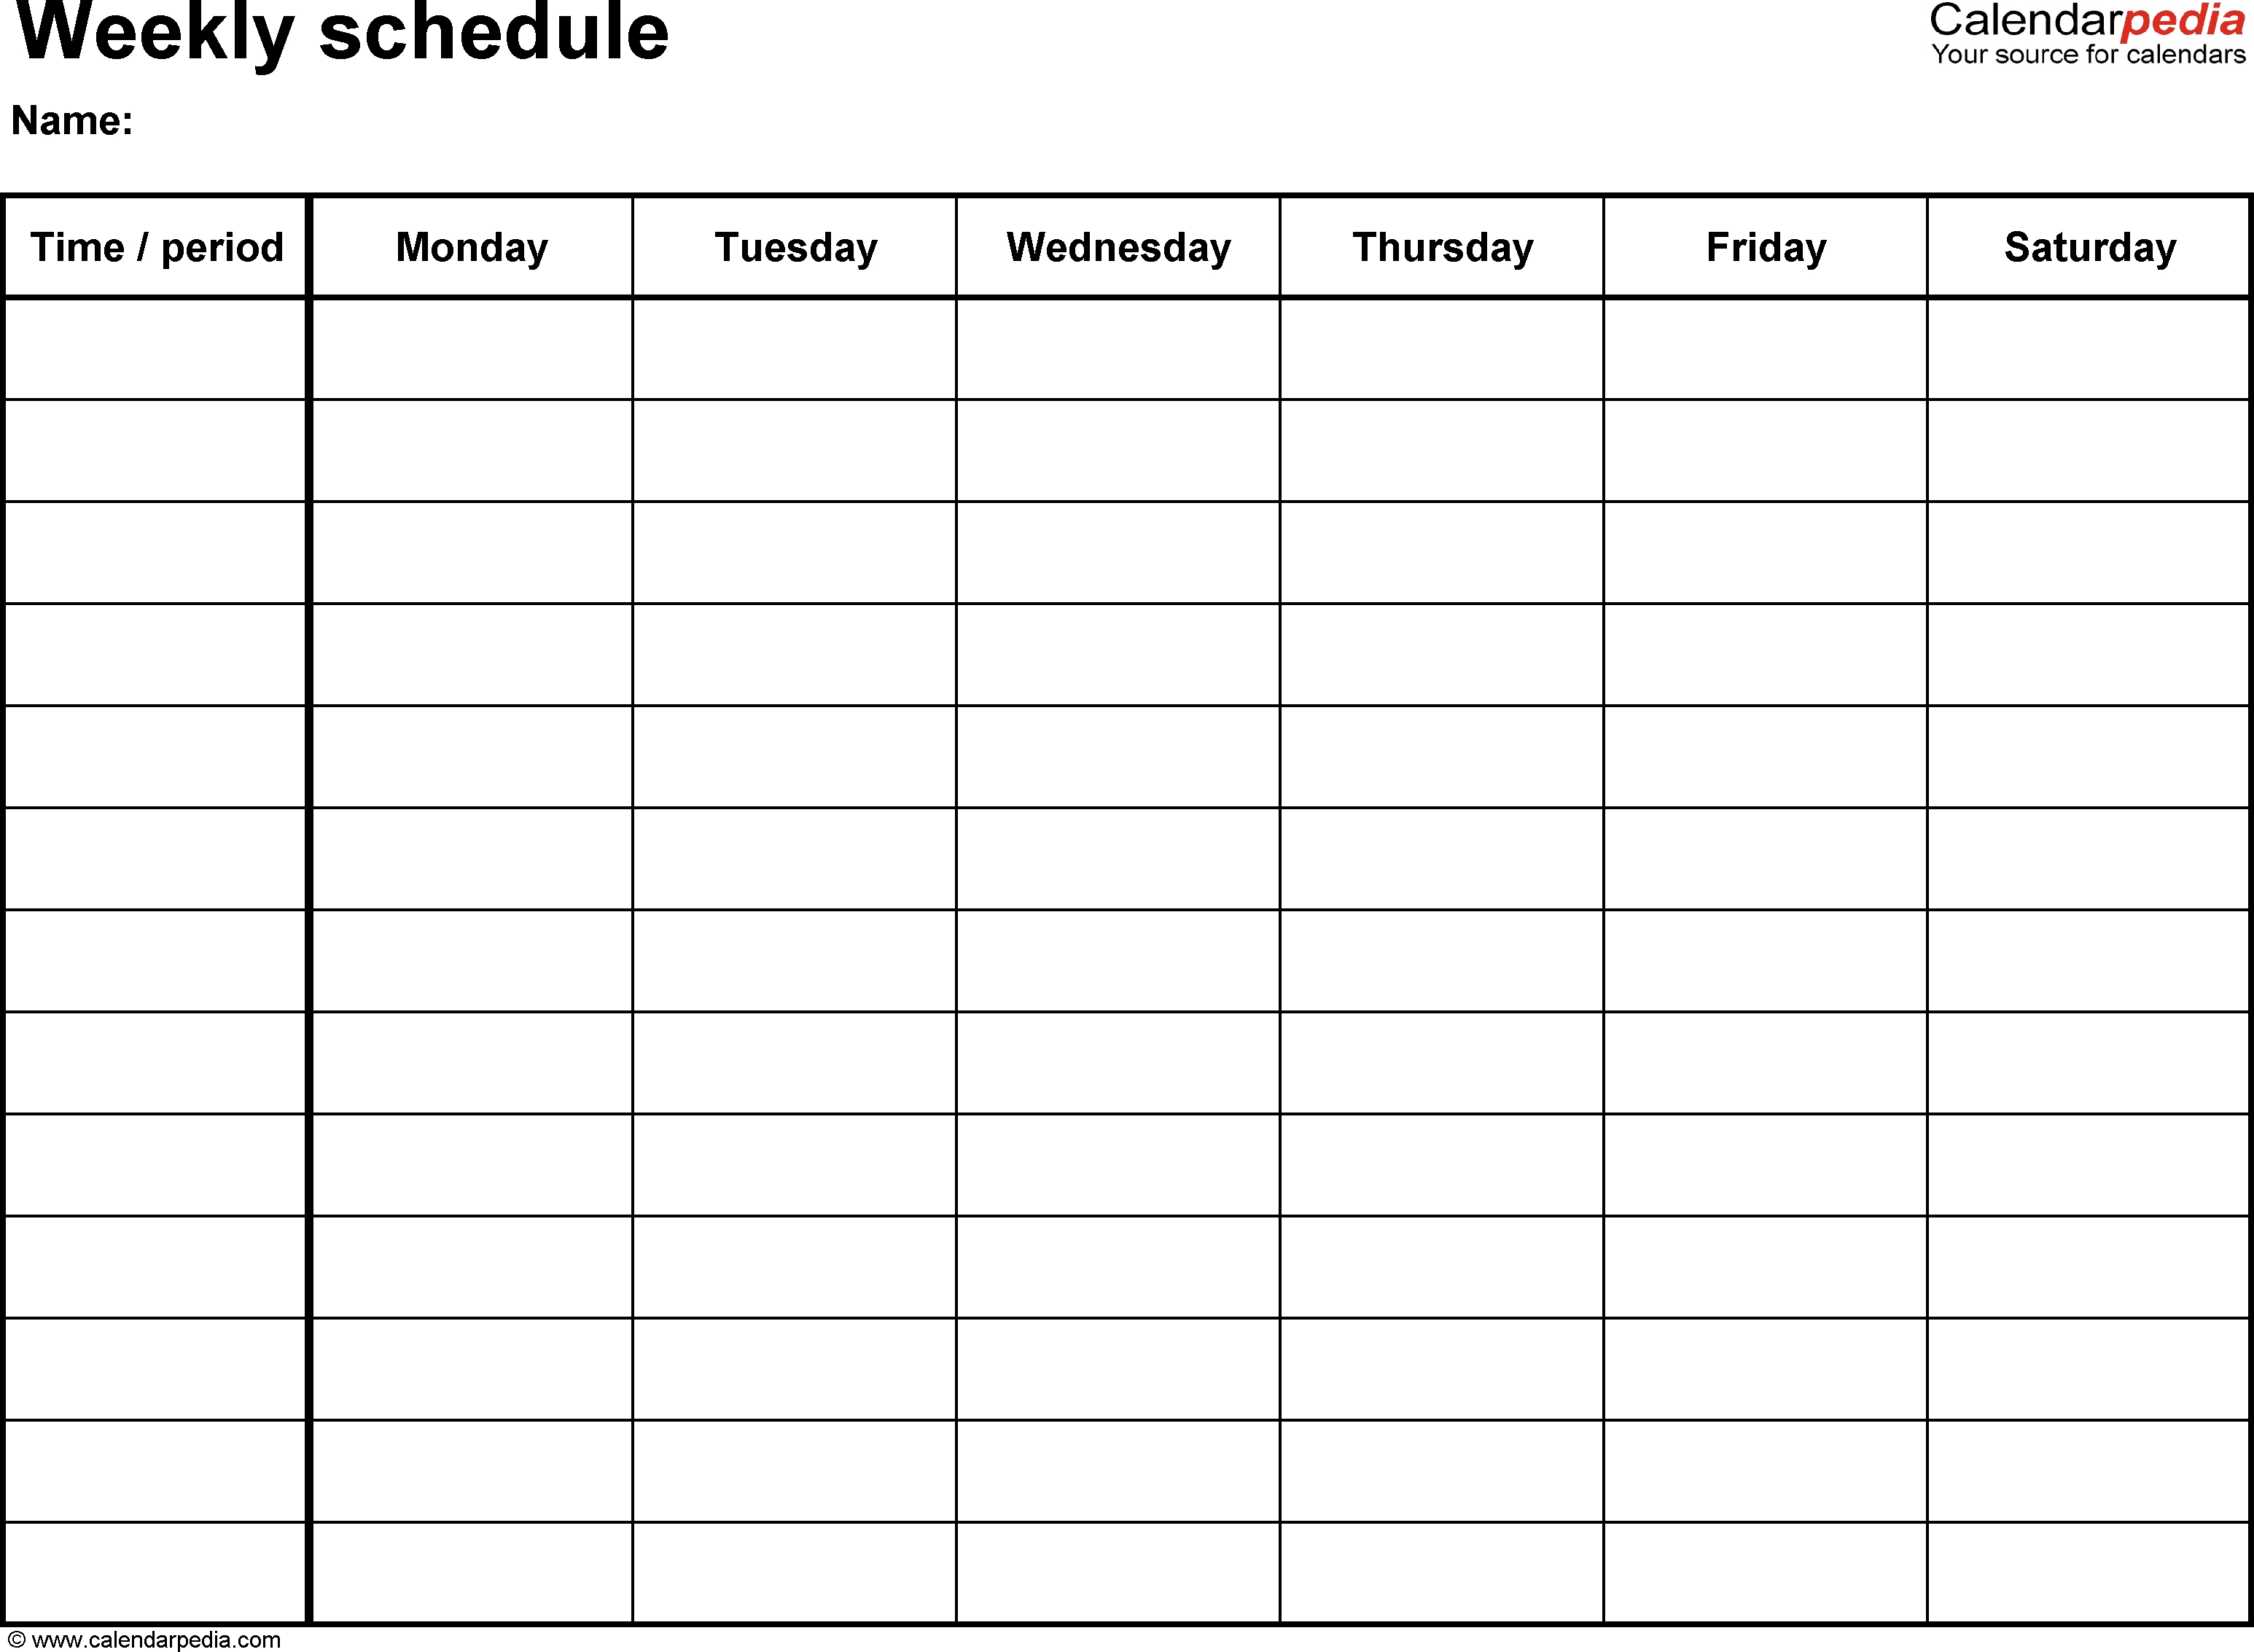 Free Weekly Schedule Templates For Excel - 18 Templates in Free Printable 7 Day 15 Minute Appointment Calendar Sheets